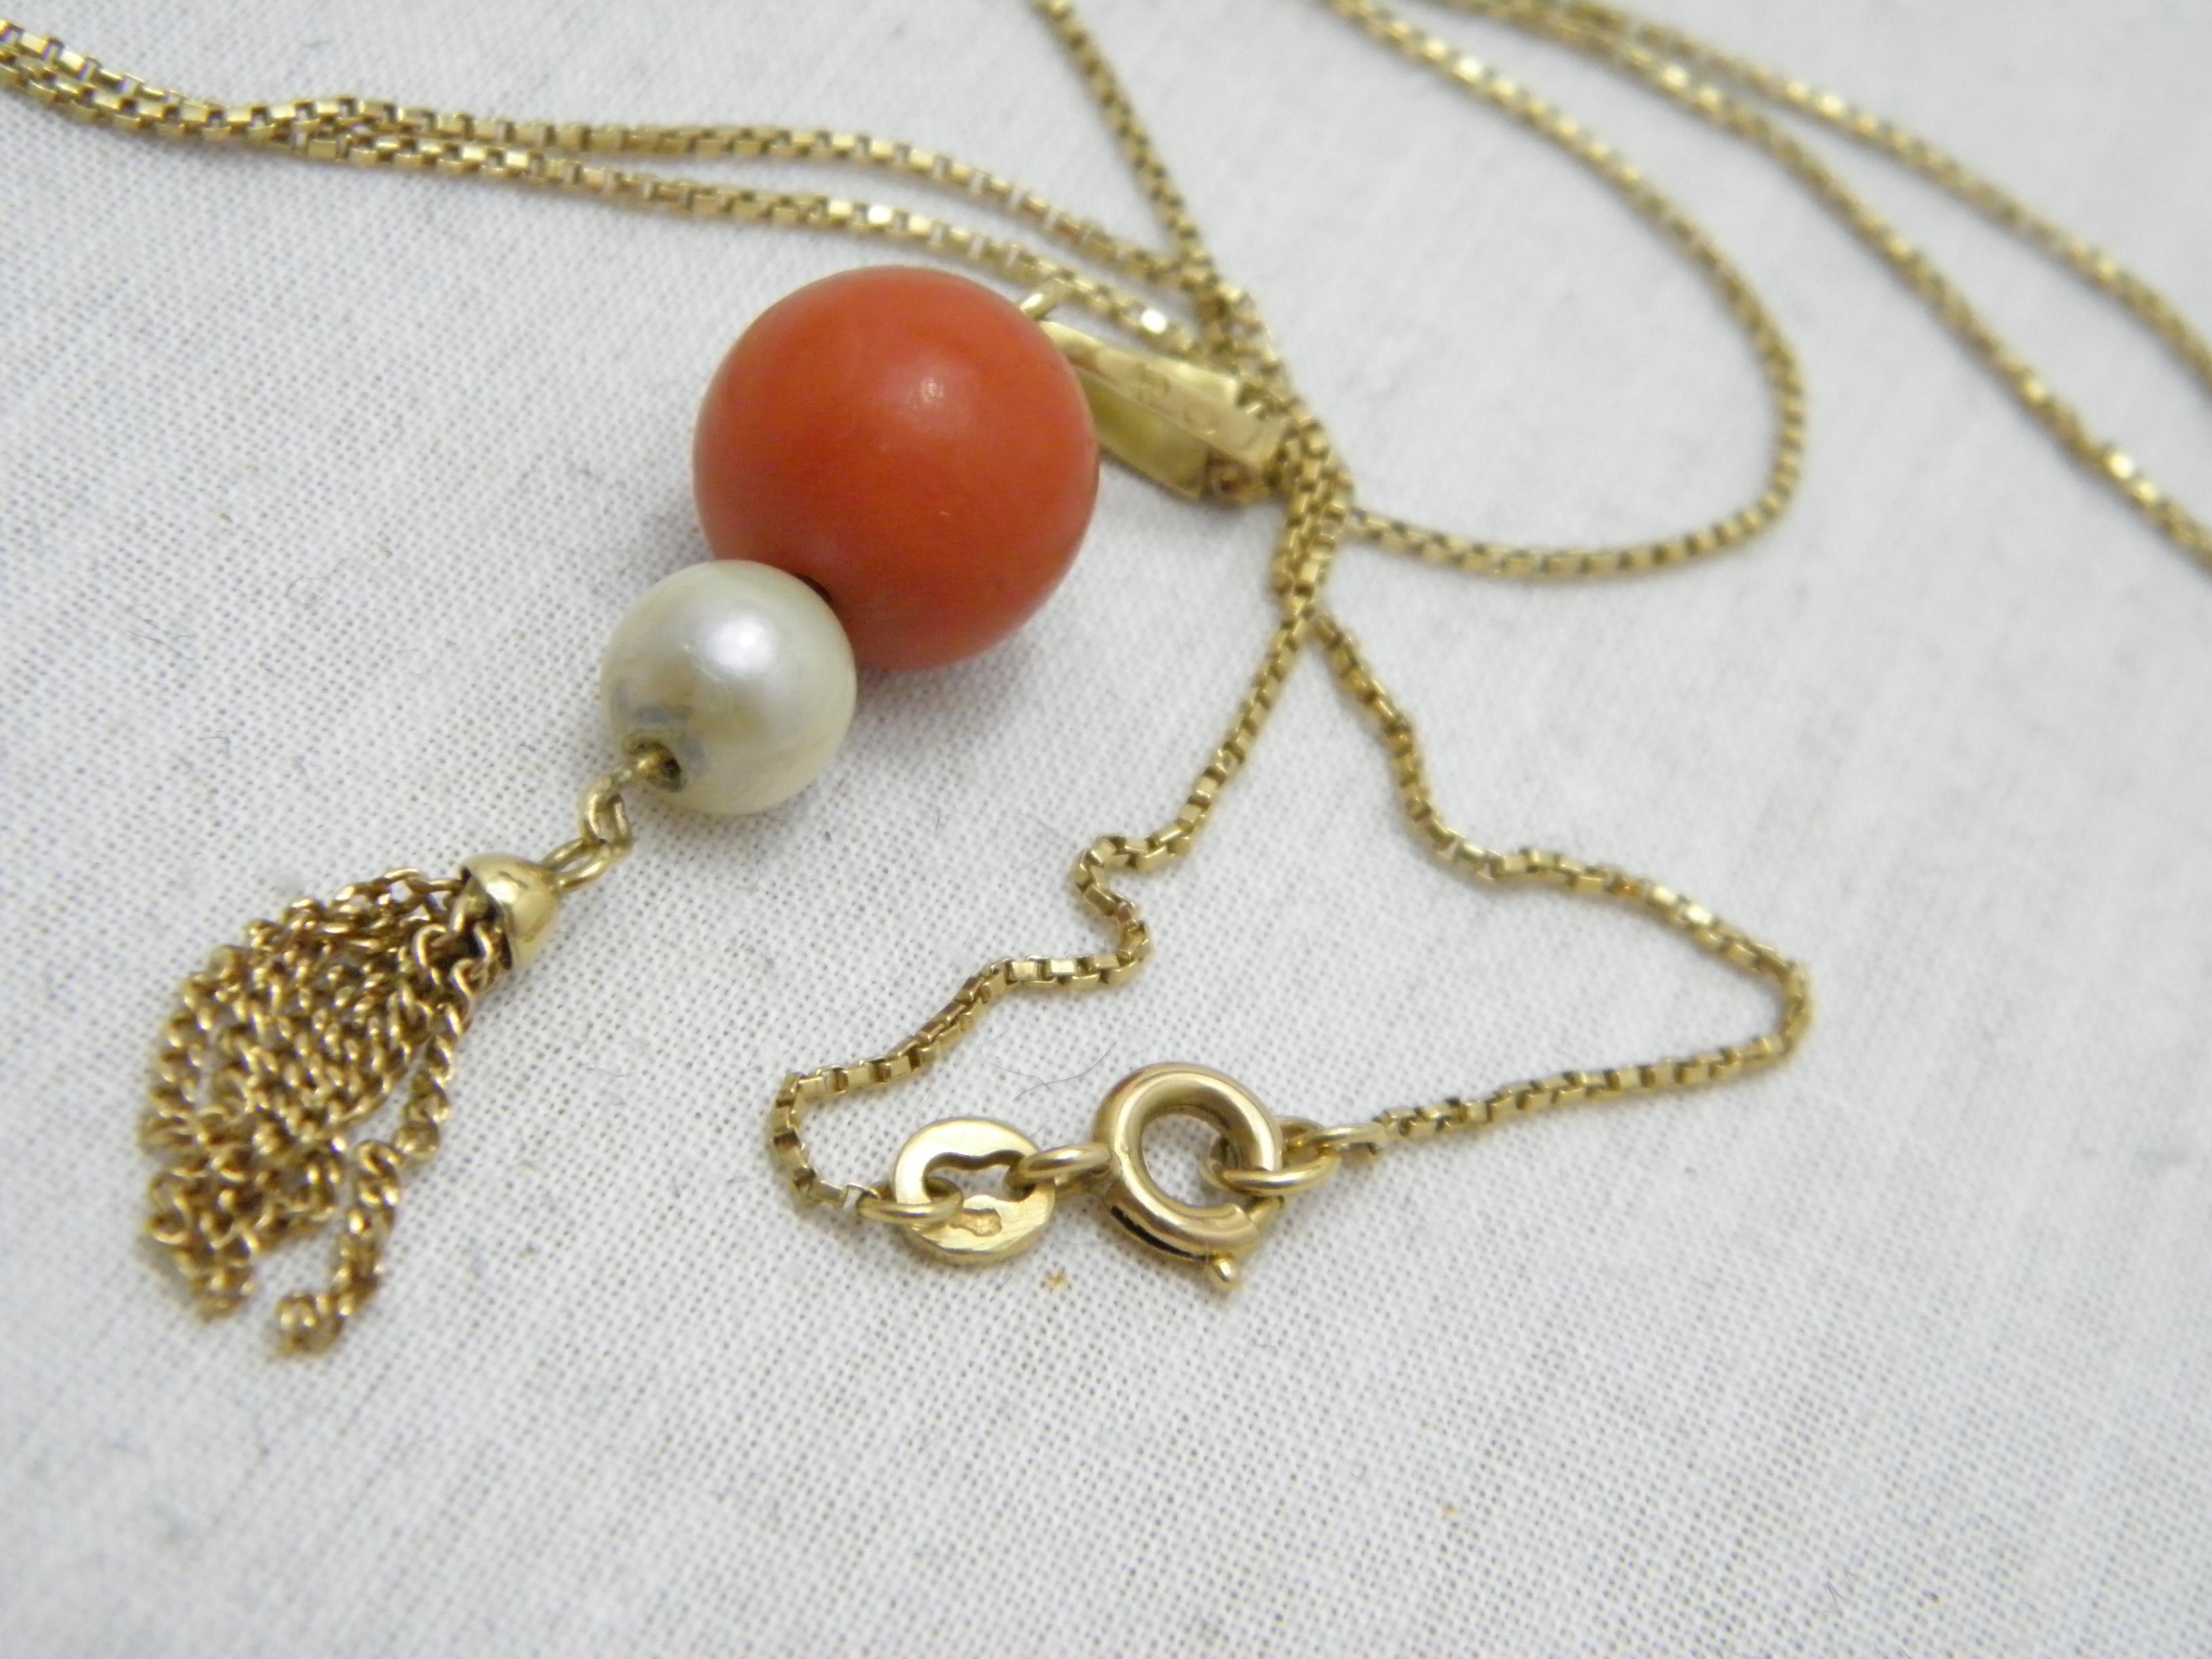 Antique 18ct Gold Coral Pearl Pendant Necklace Box Chain 750 Purity 21 Inch 1